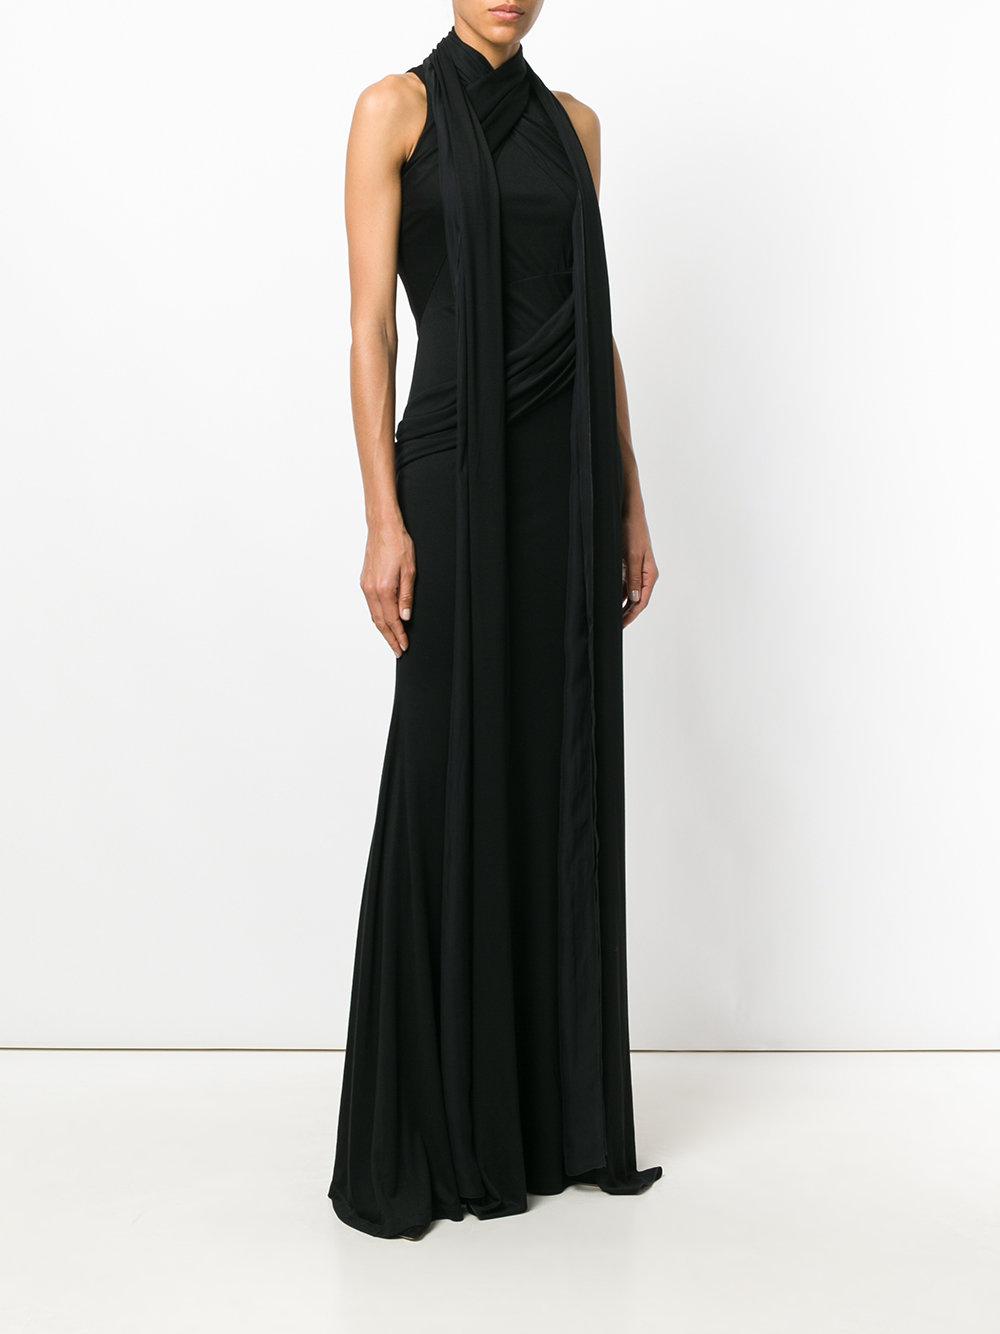 Givenchy Silk Draped Halter Neck Gown in Black - Lyst